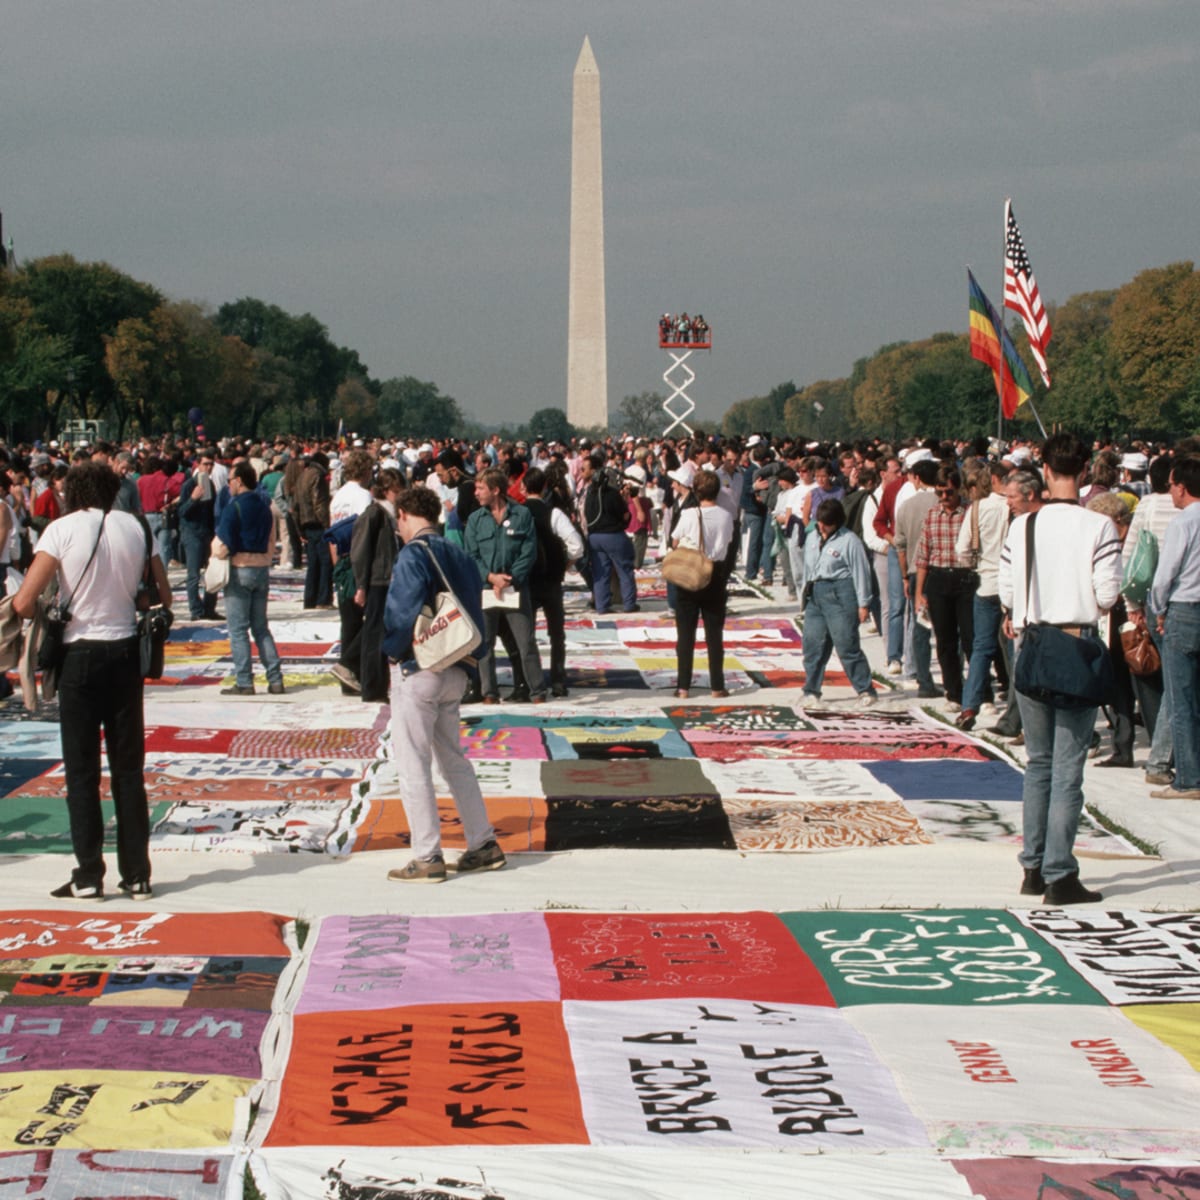 Historical artifact on campus: National AIDS Memorial Quilt Panels